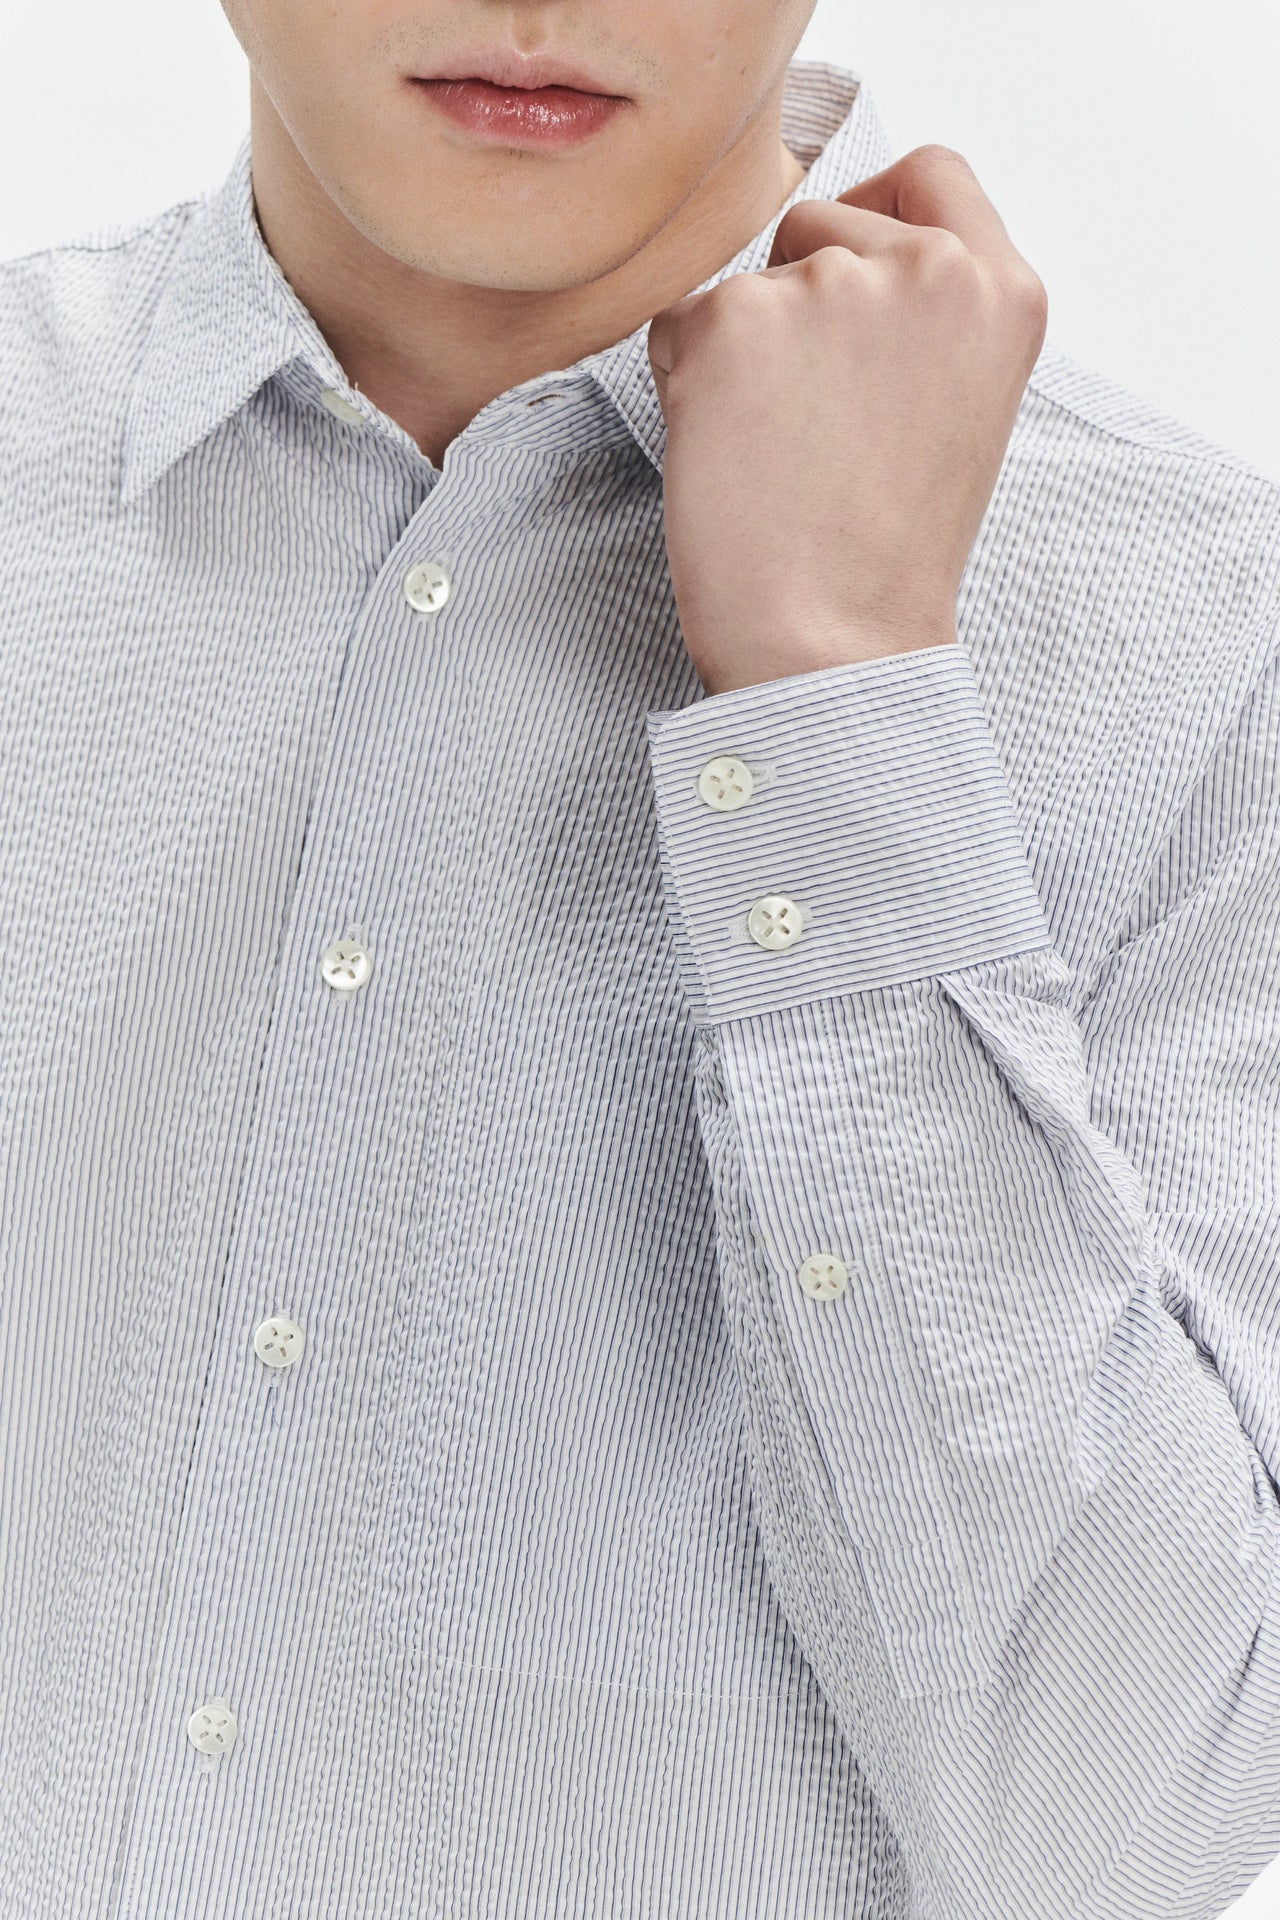 Feel Good Shirt in the Finest Italian Subtle Blue and White Cotton Seersucker by Albini